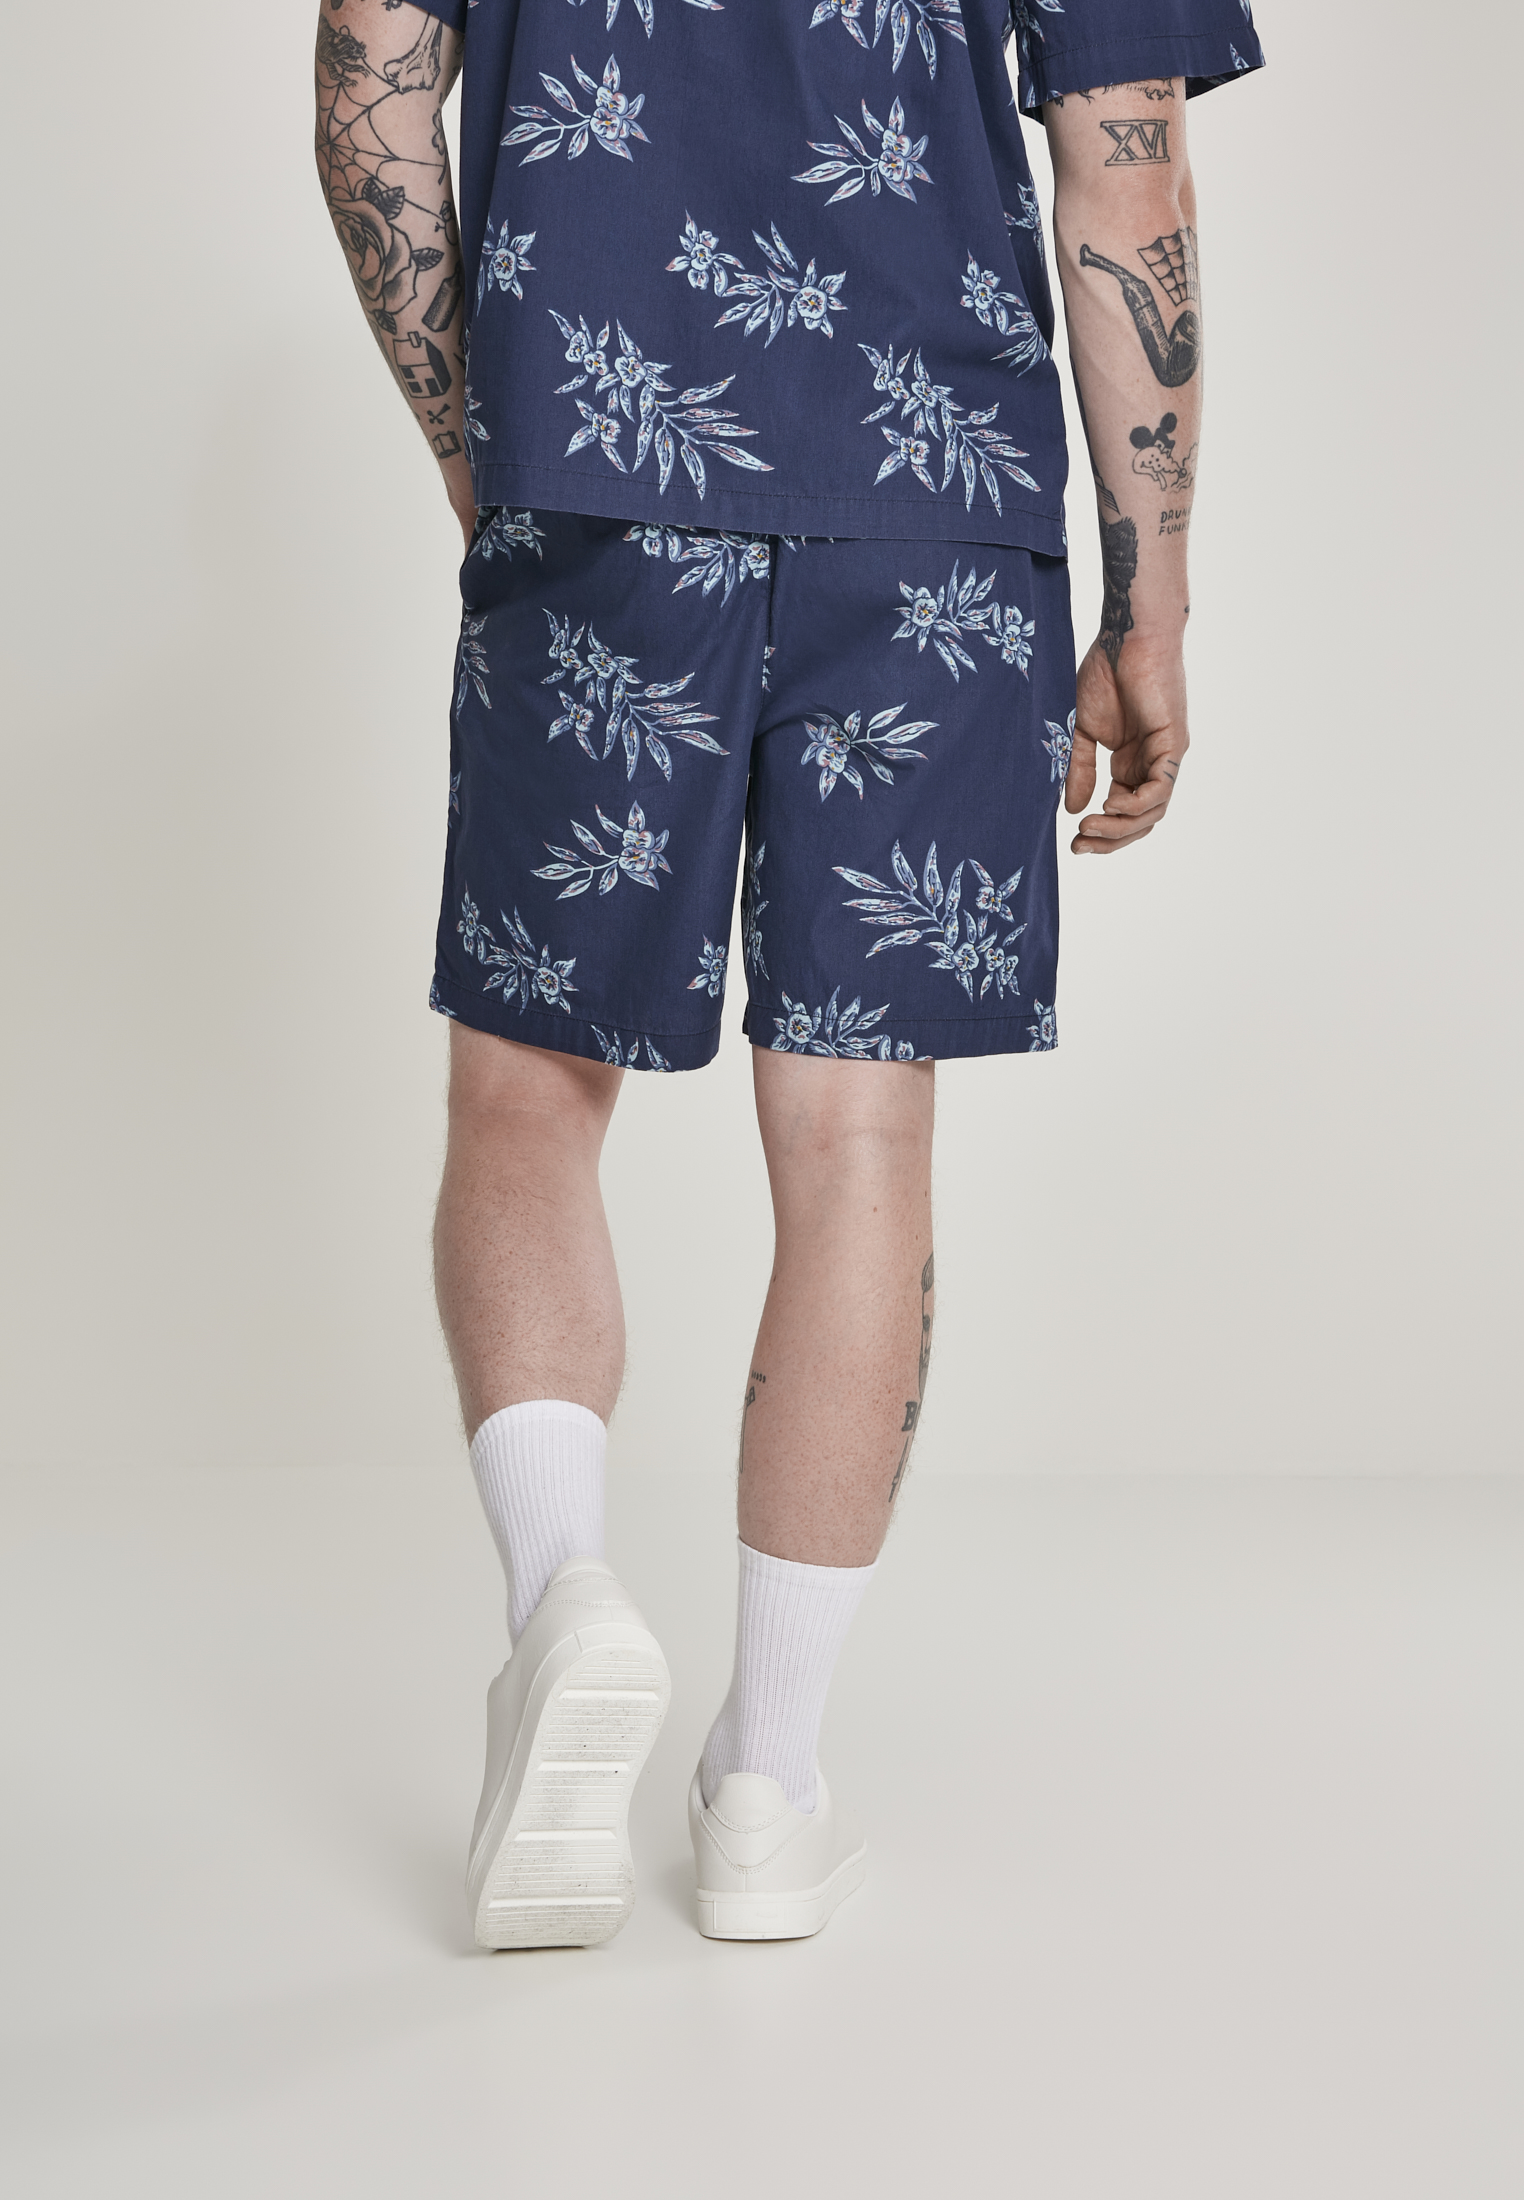 Plus Size Pattern Resort Shorts in Farbe subtile floral